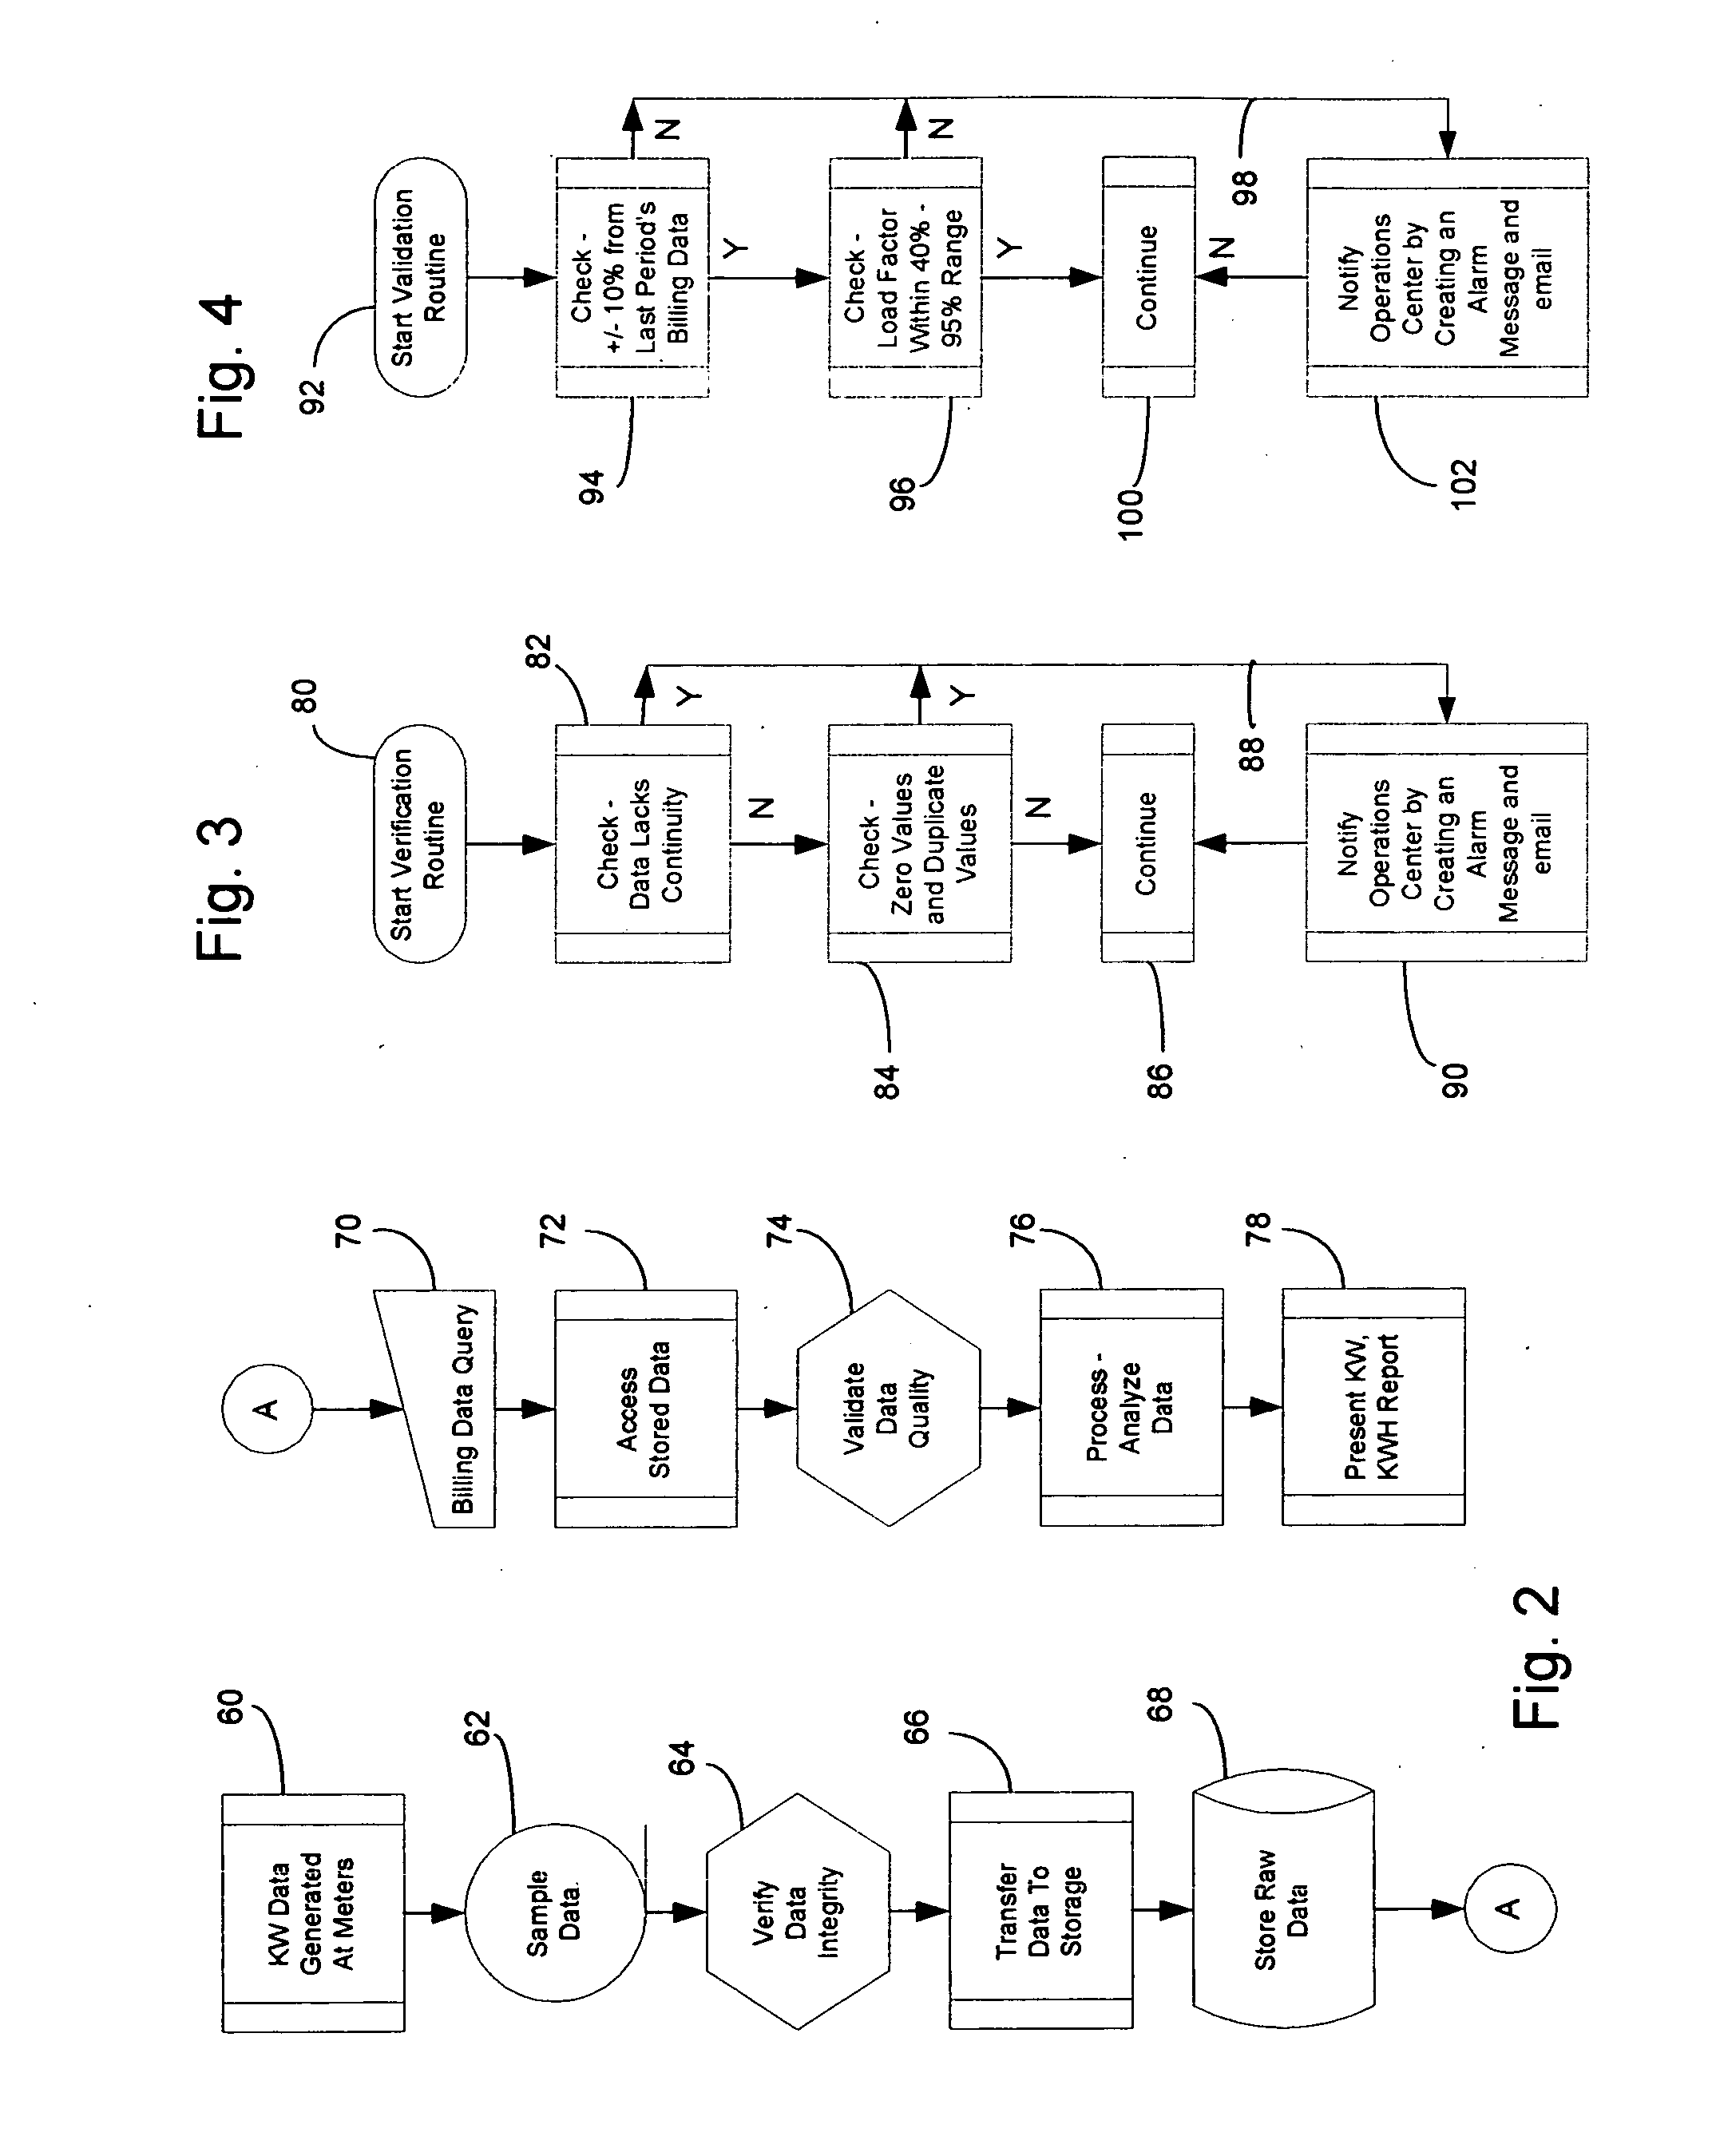 Electric power usage and demand reporting system